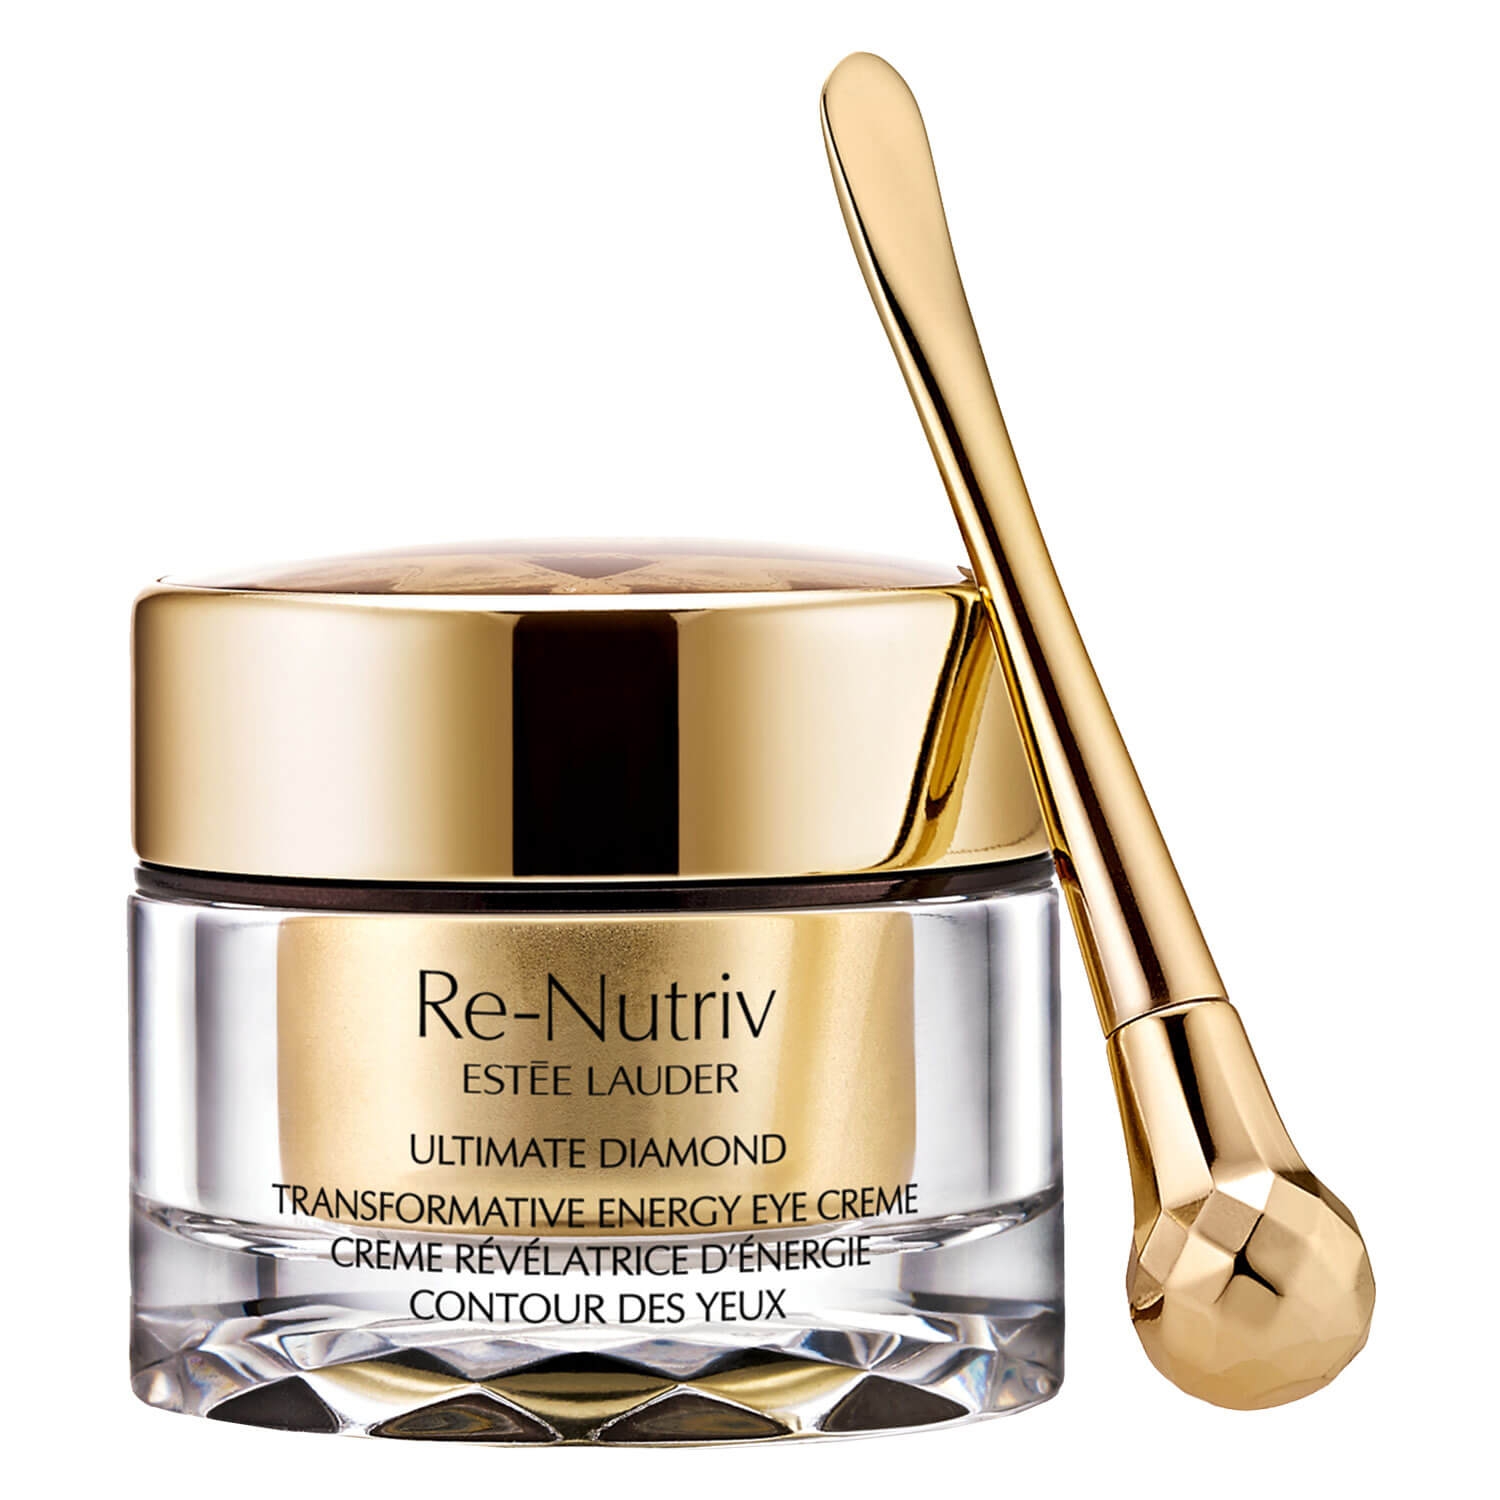 Product image from Re-Nutriv - Ultimate Diamond Transformative Energy Eye Creme